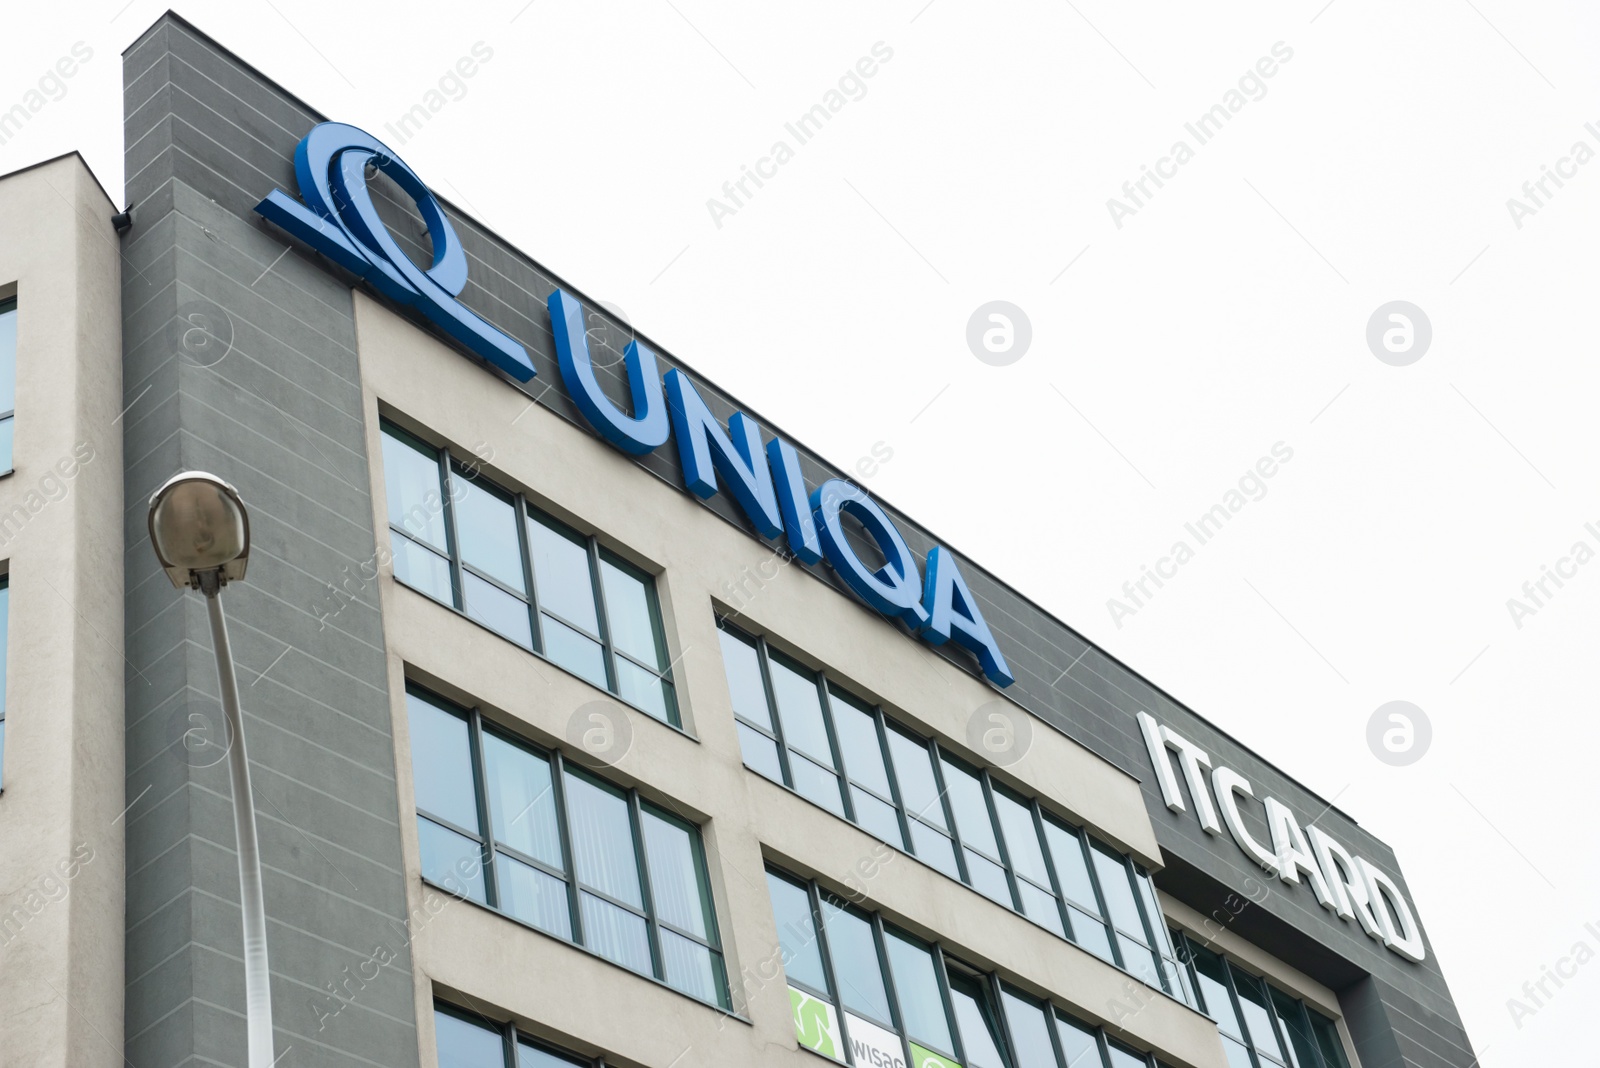 Photo of Warsaw, Poland - September 10, 2022: Building with modern Uniqa and Itcard logos